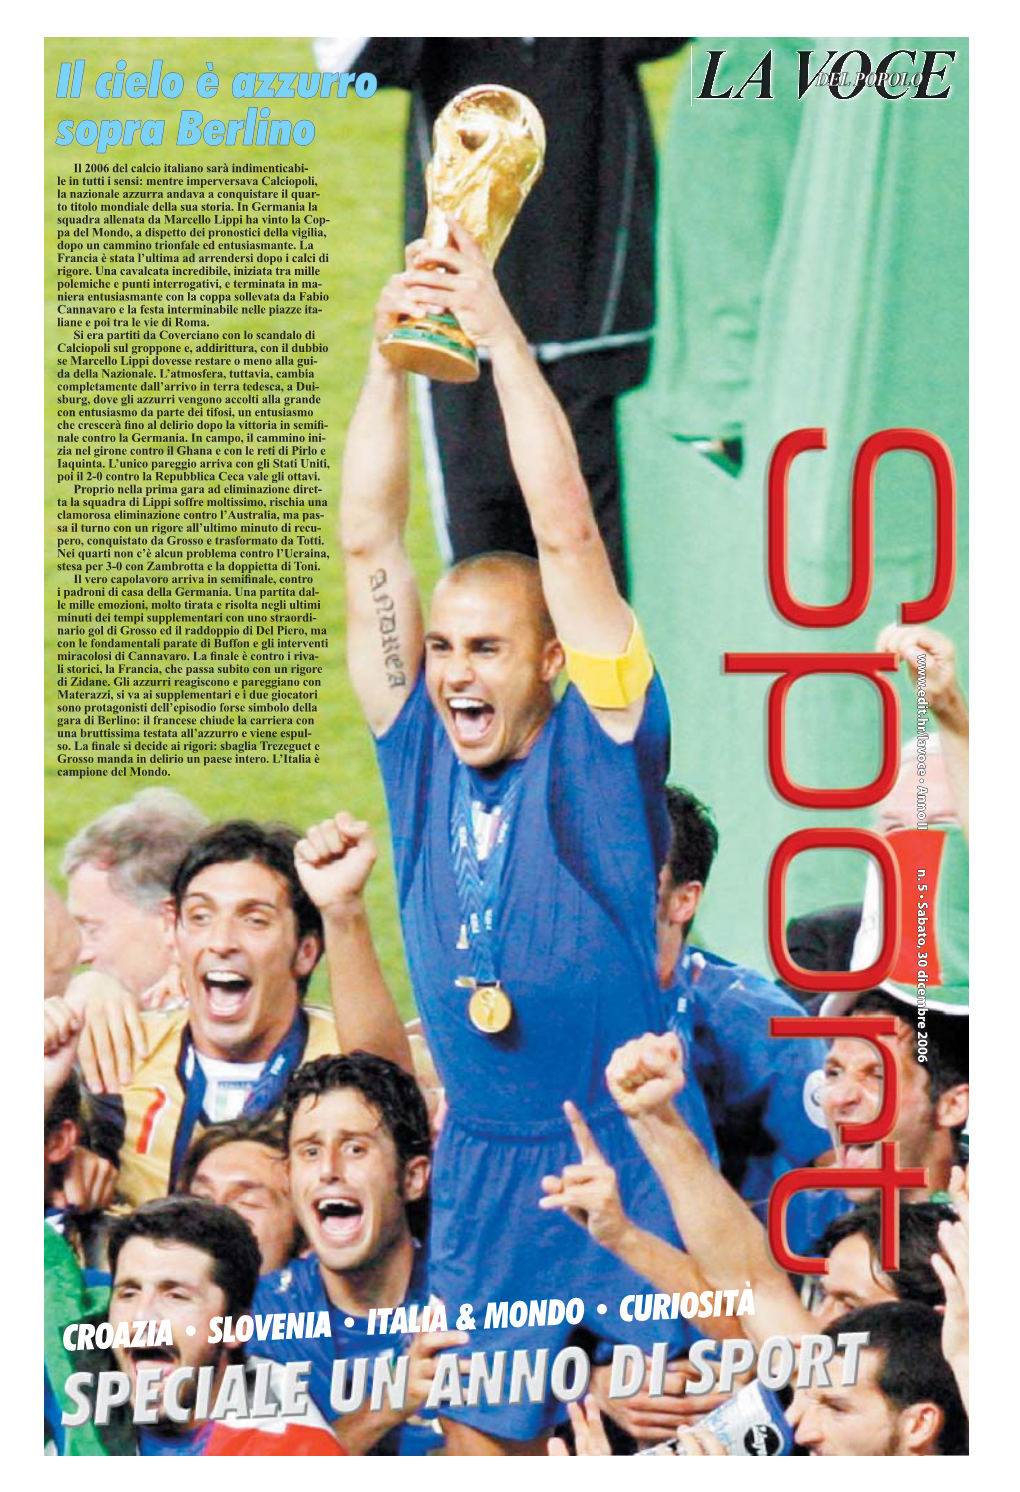 Sport 2006.Indd